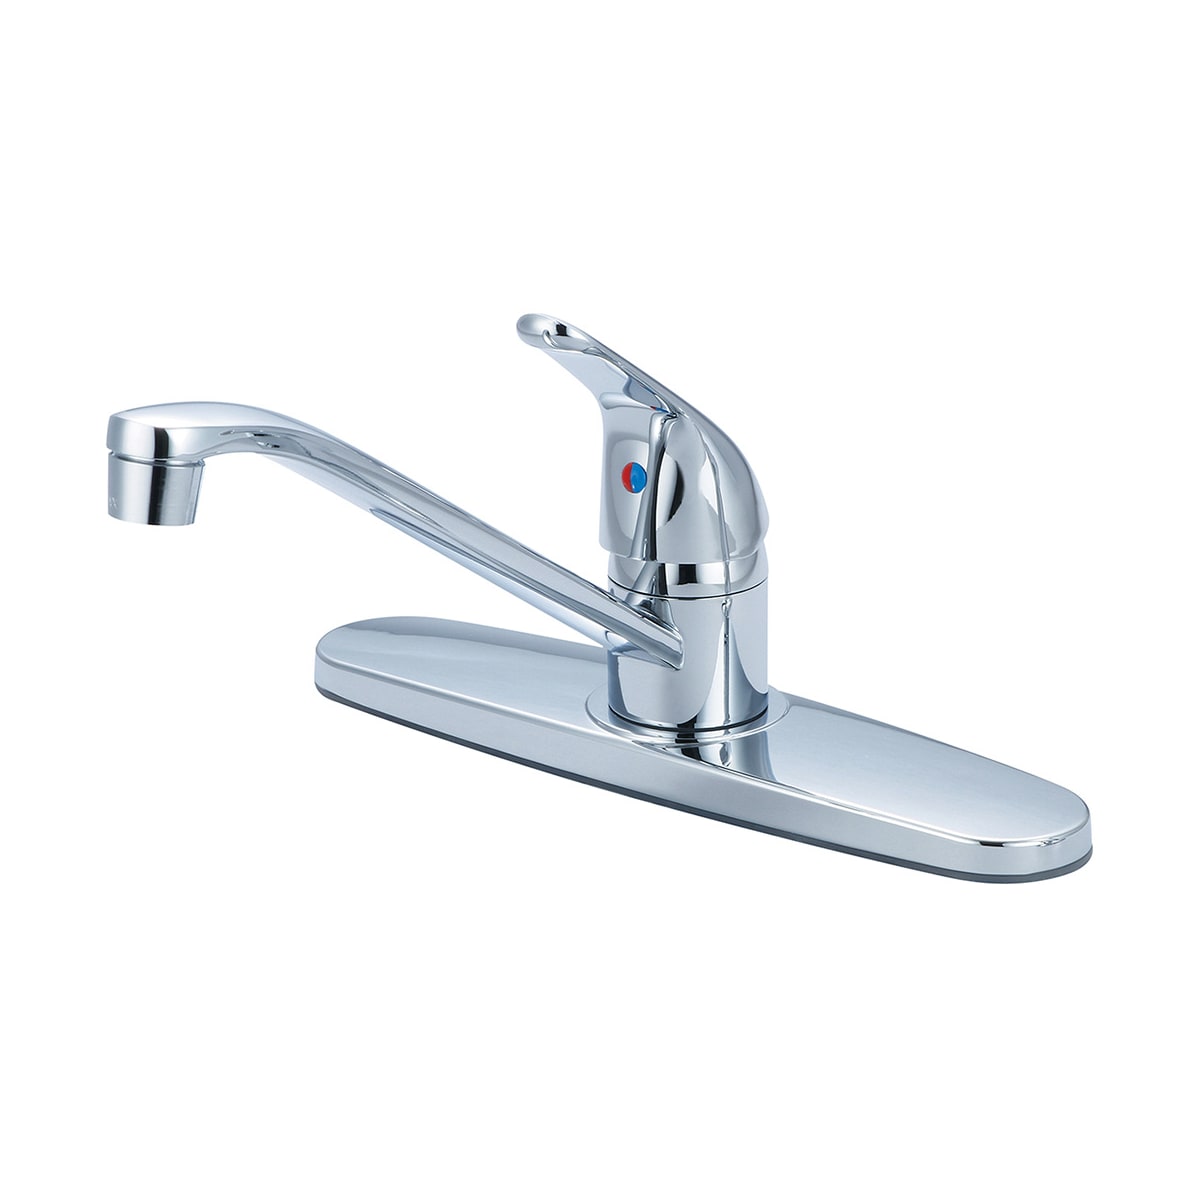 Olympia Faucets K 4160h Polished Chrome Elite 1 5 Gpm Widespread Kitchen Faucet With 7 5 16 Reach D Style Swivel Spout And Lever Handles Faucetdirect Com